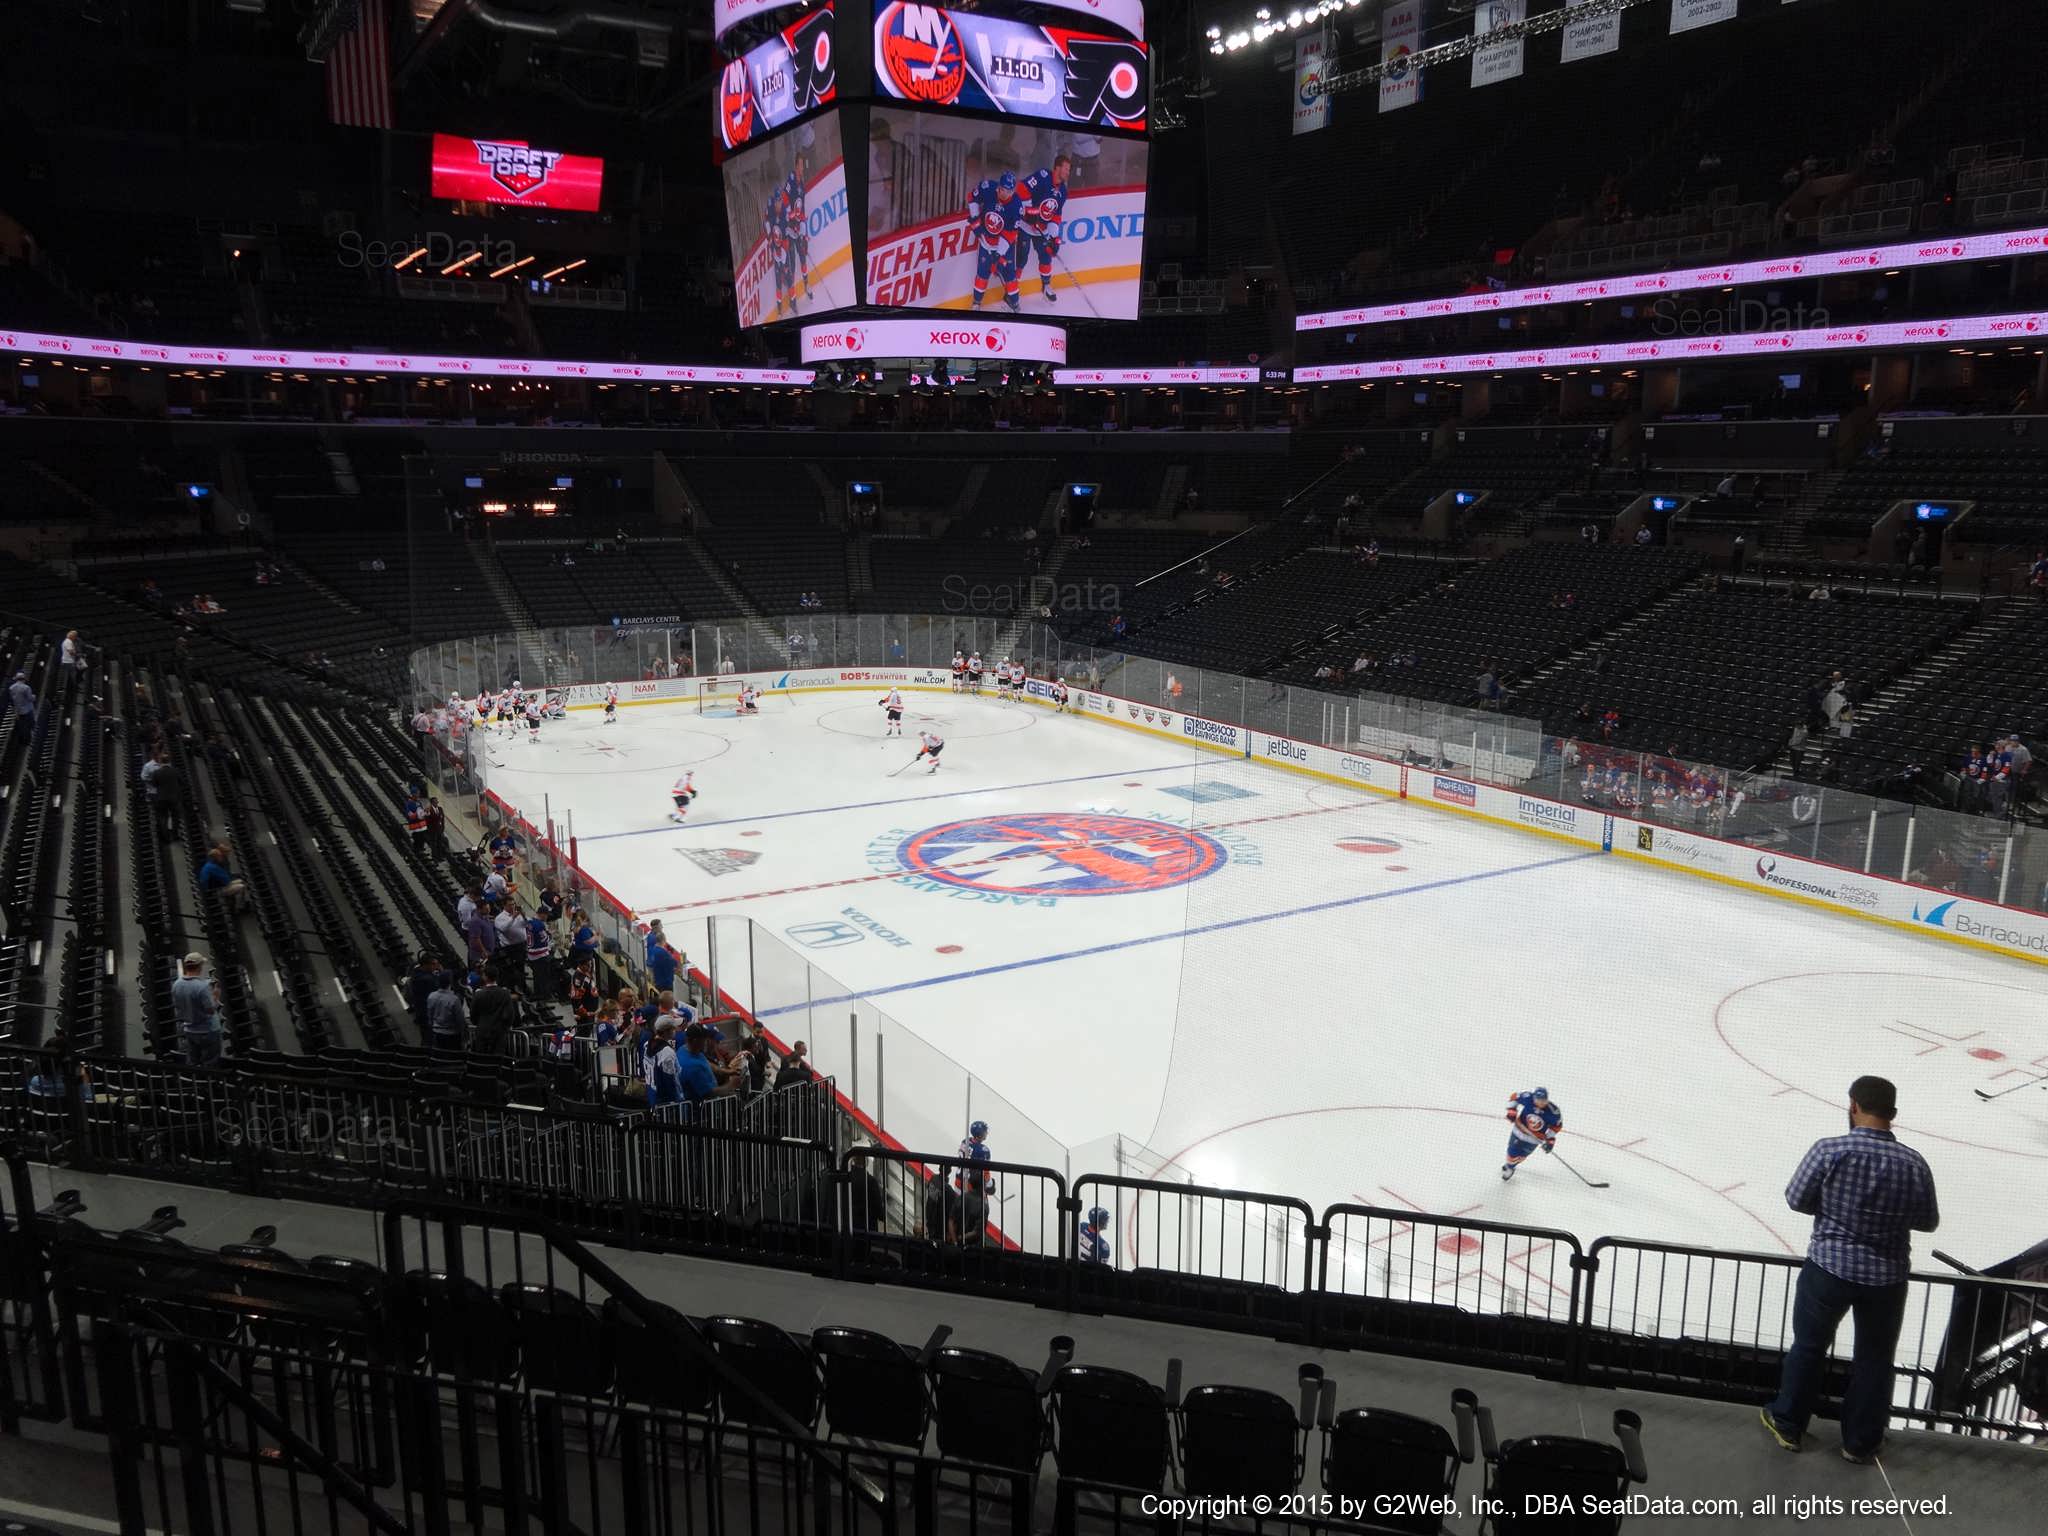 Seat View from Section 102 at the Barclays Center, home of the New York Islanders